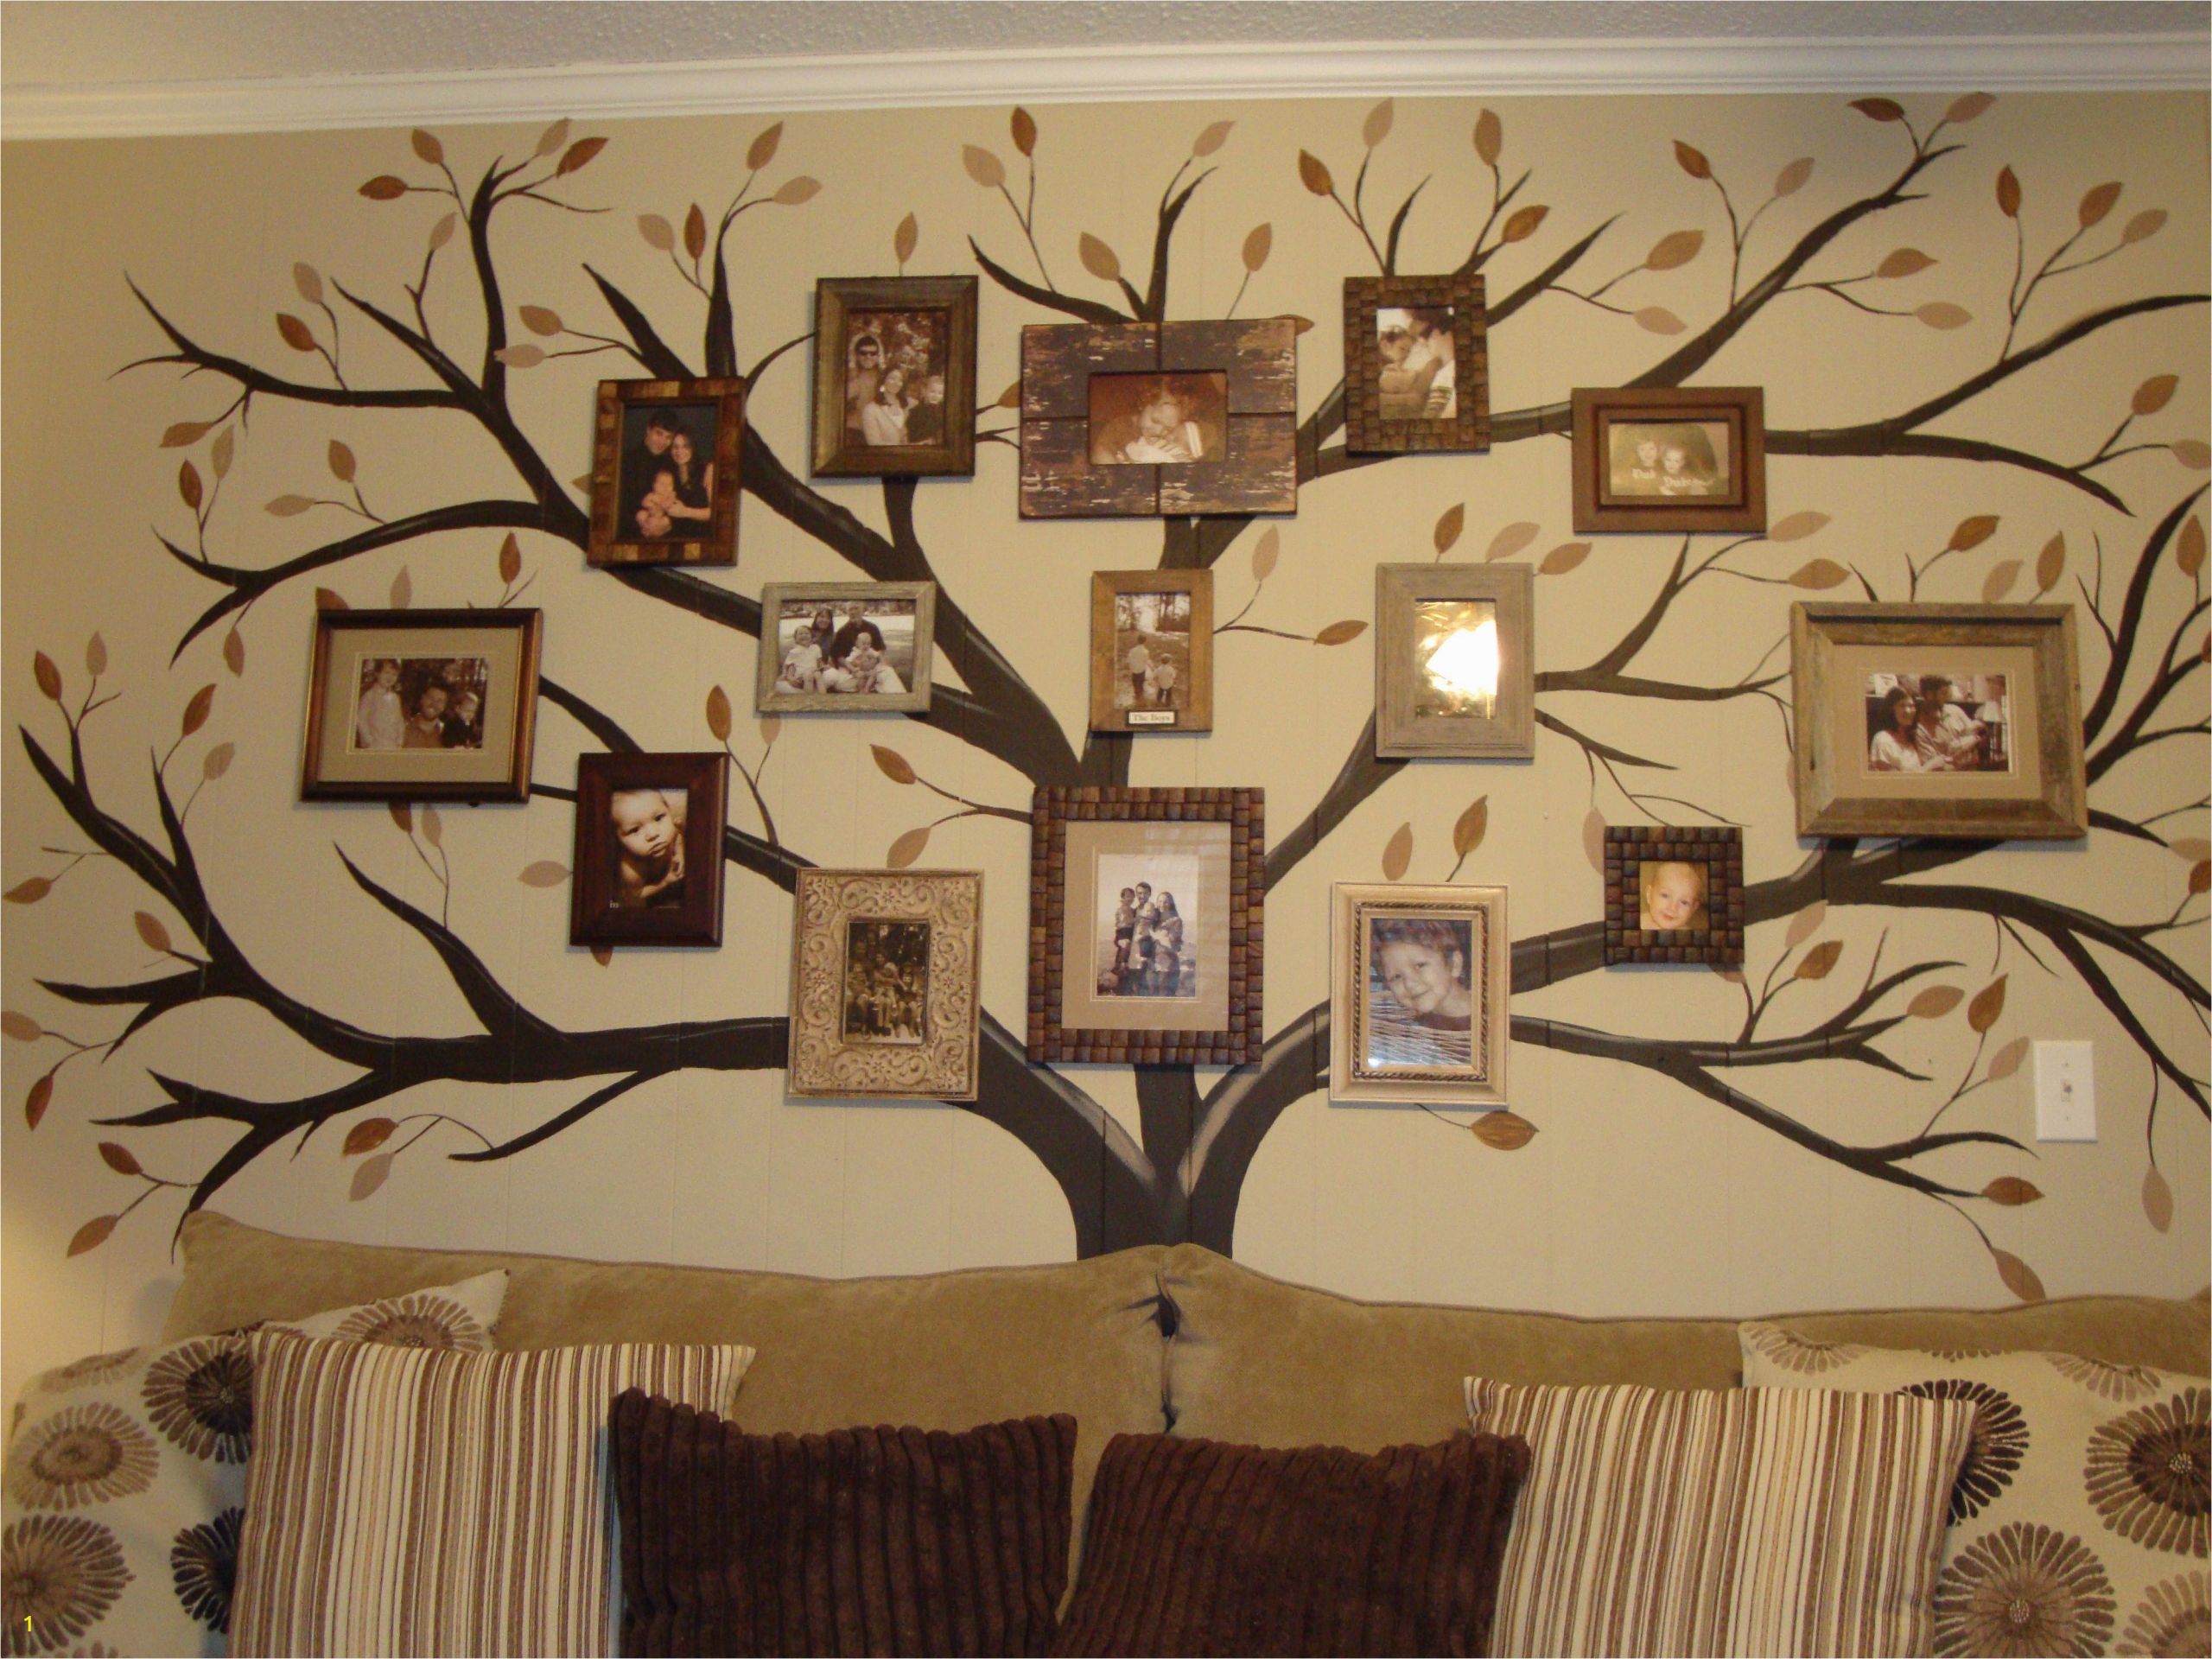 Diy Wall Murals Pinterest My Family Tree Mural Pied From Another I Found On